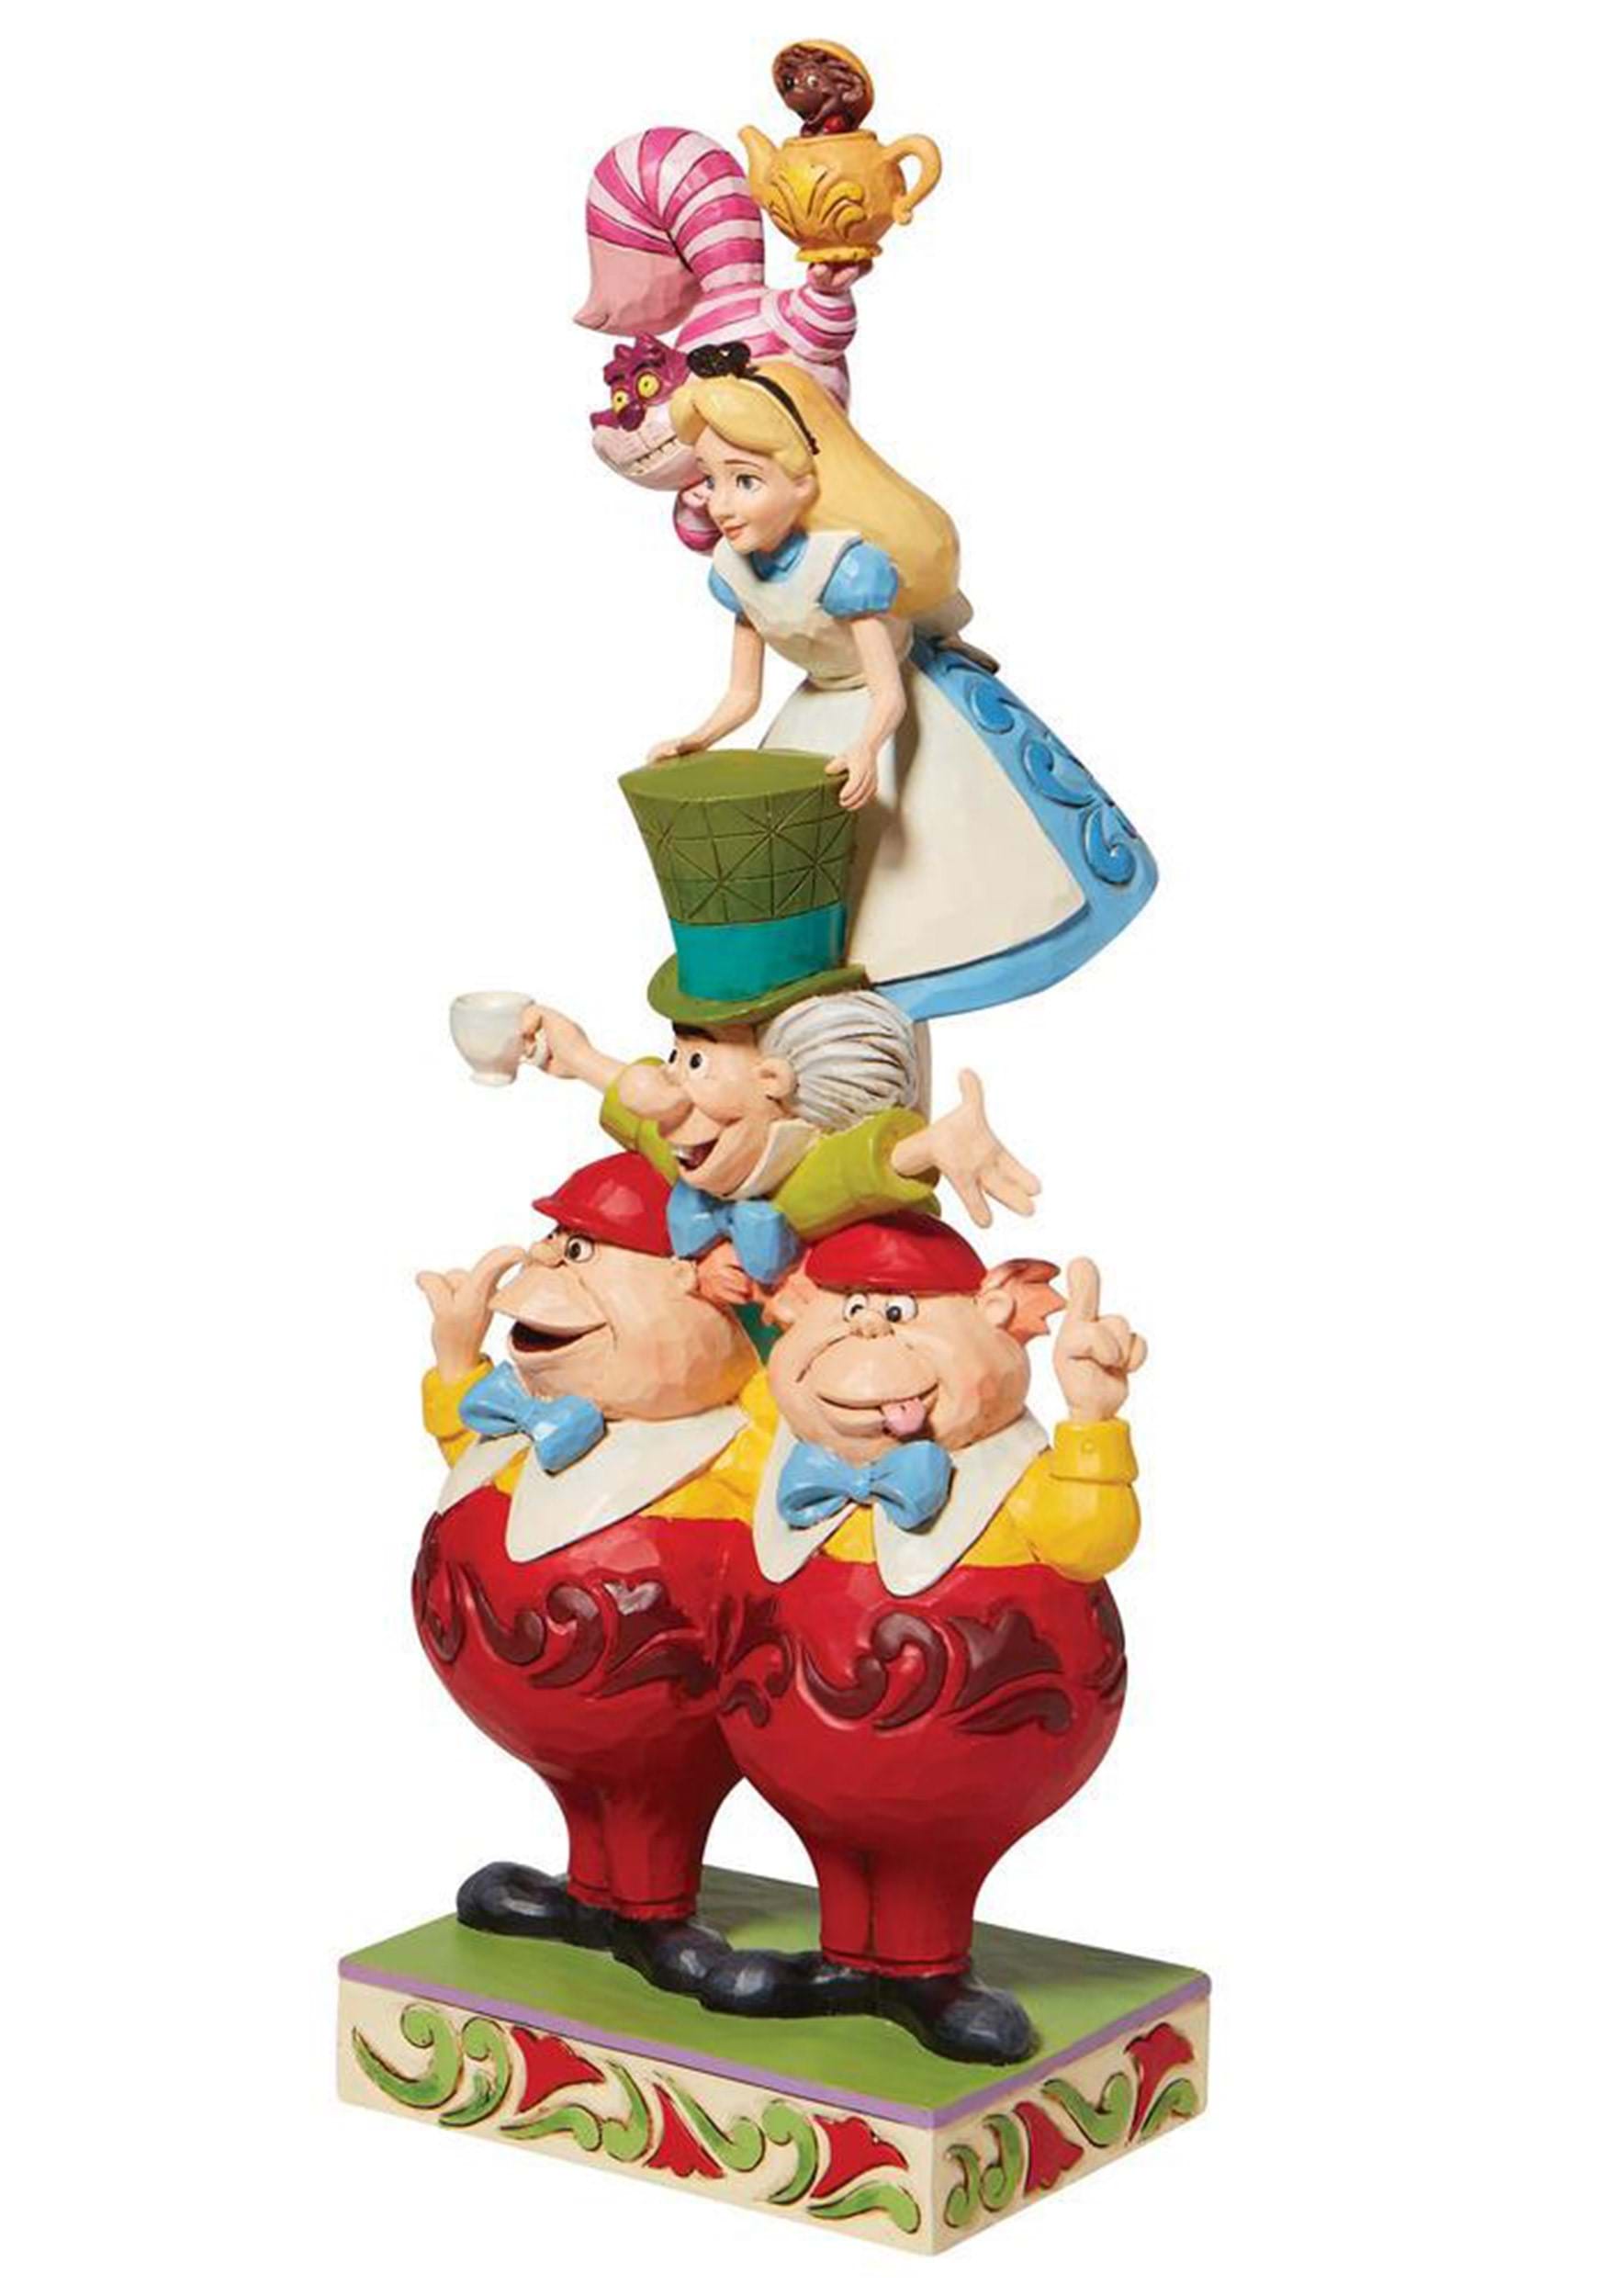 https://images.fun.com/products/72848/2-1-180463/jim-shore-alice-in-wonderland-stacked-statue-alt-2.jpg